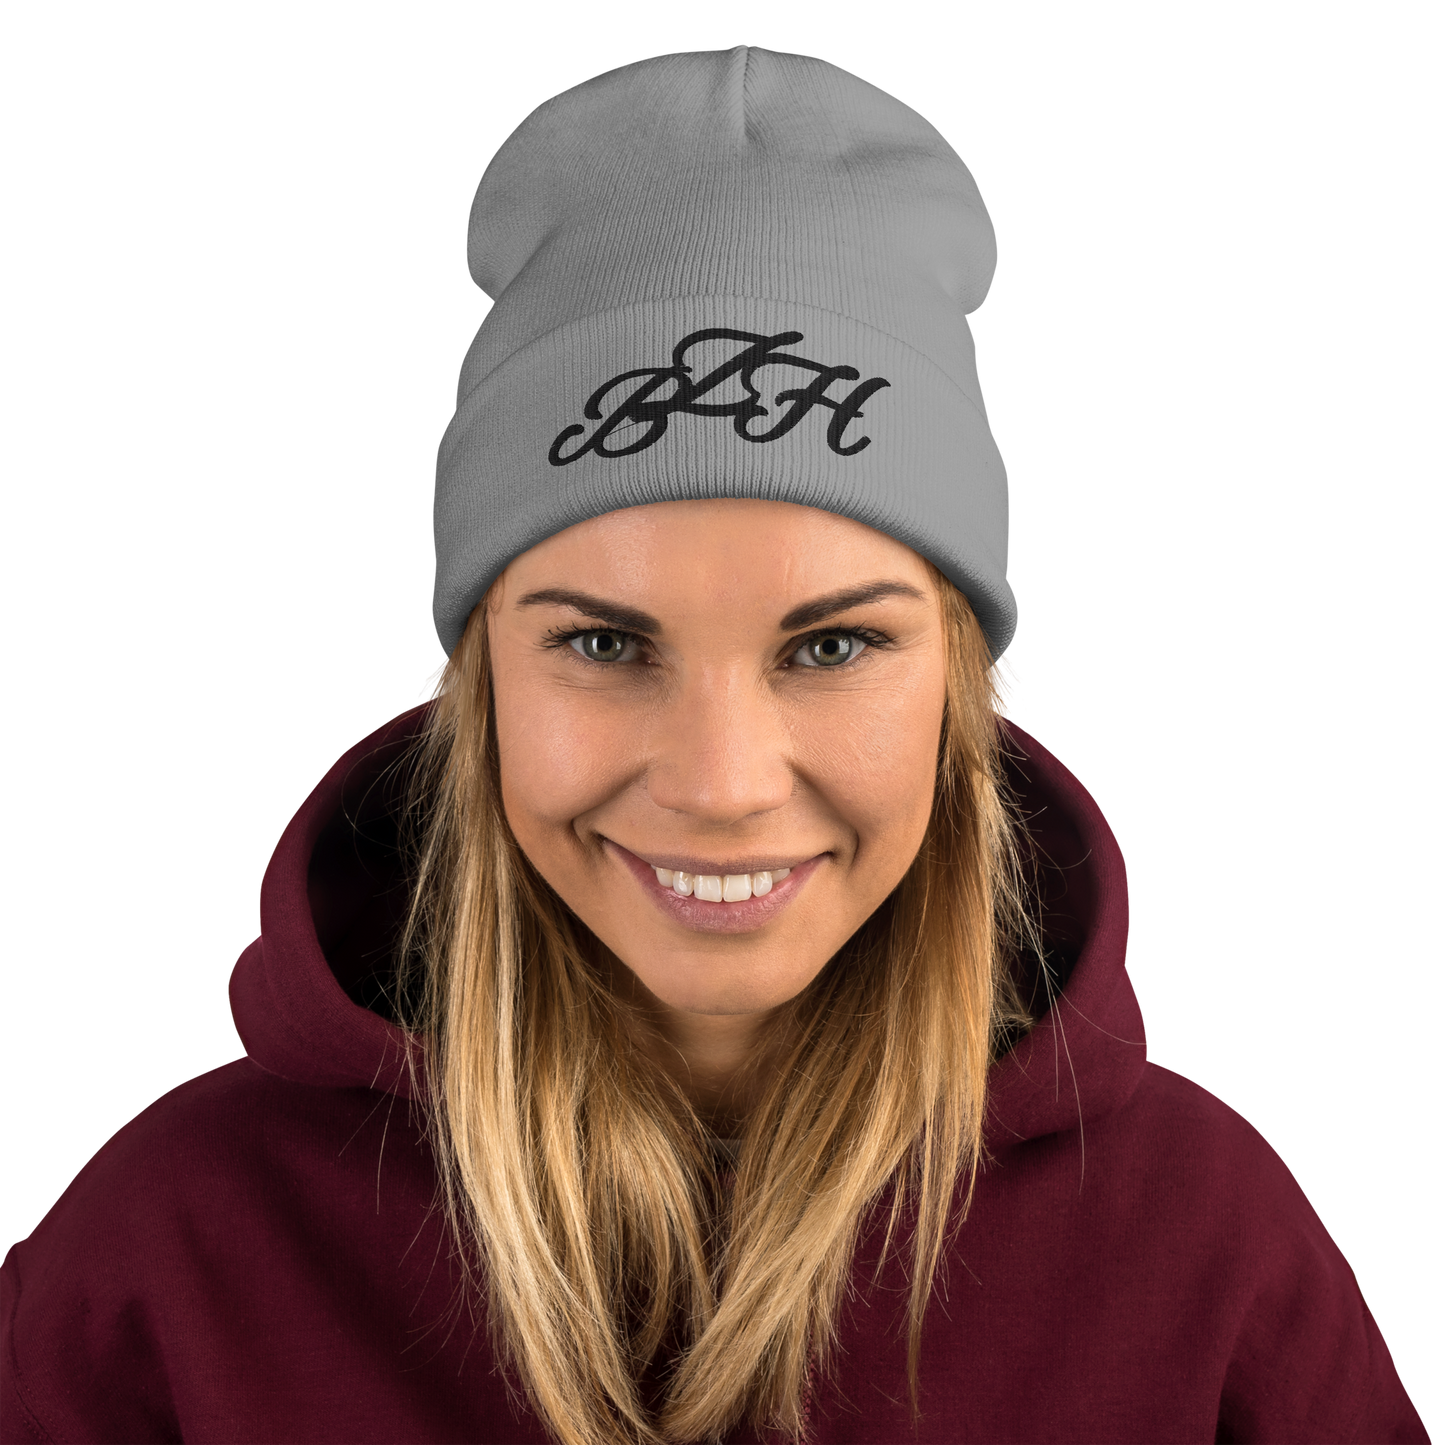 BZH Heart embroidered hat - The perfect Breton hat